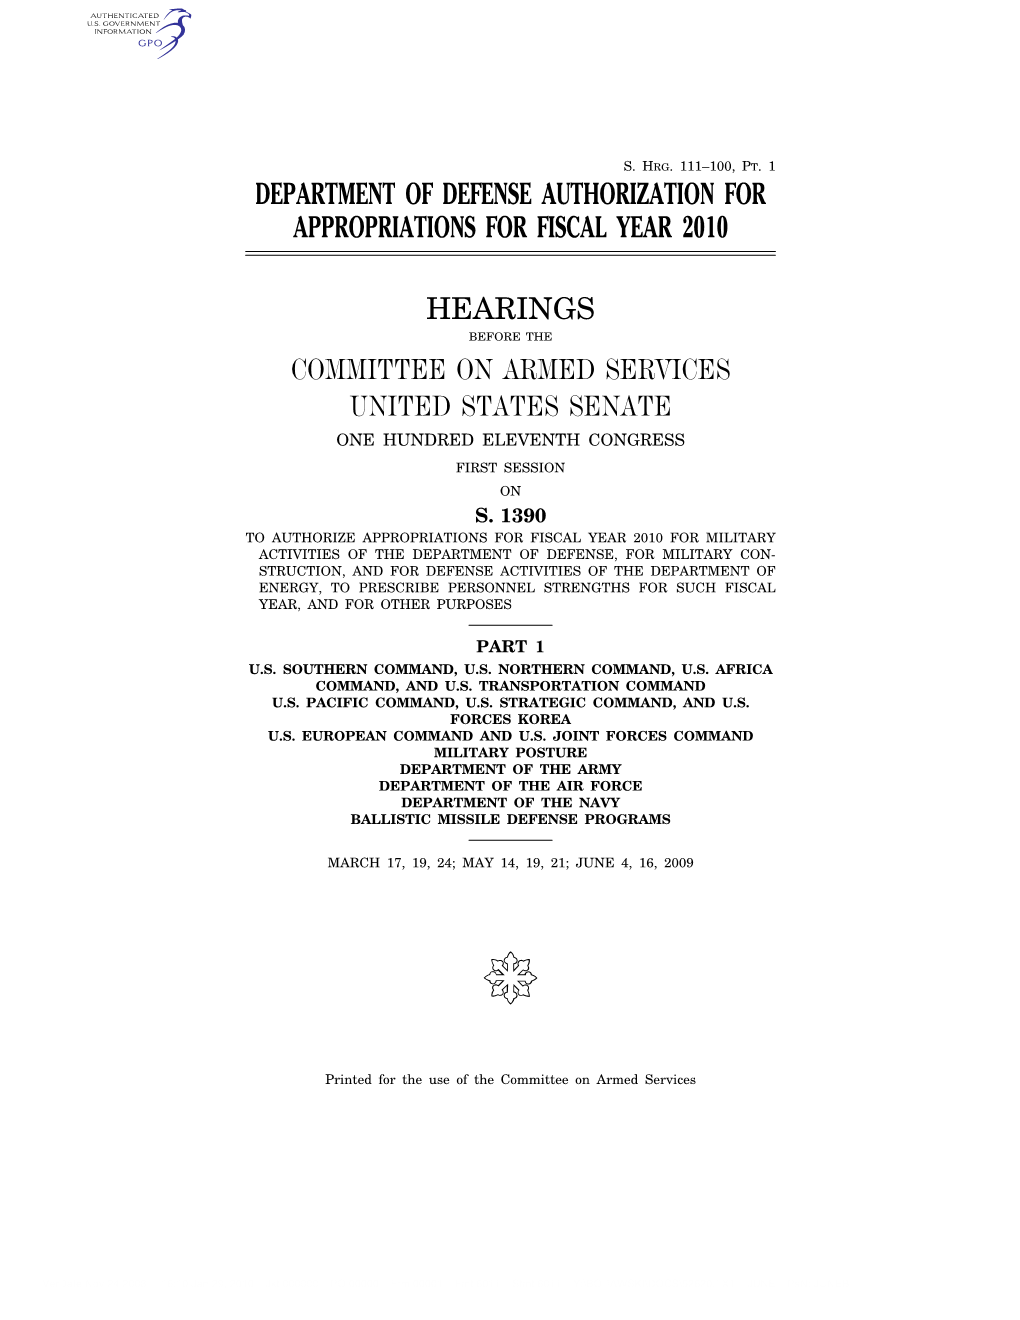 Department of Defense Authorization for Appropriations for Fiscal Year 2010